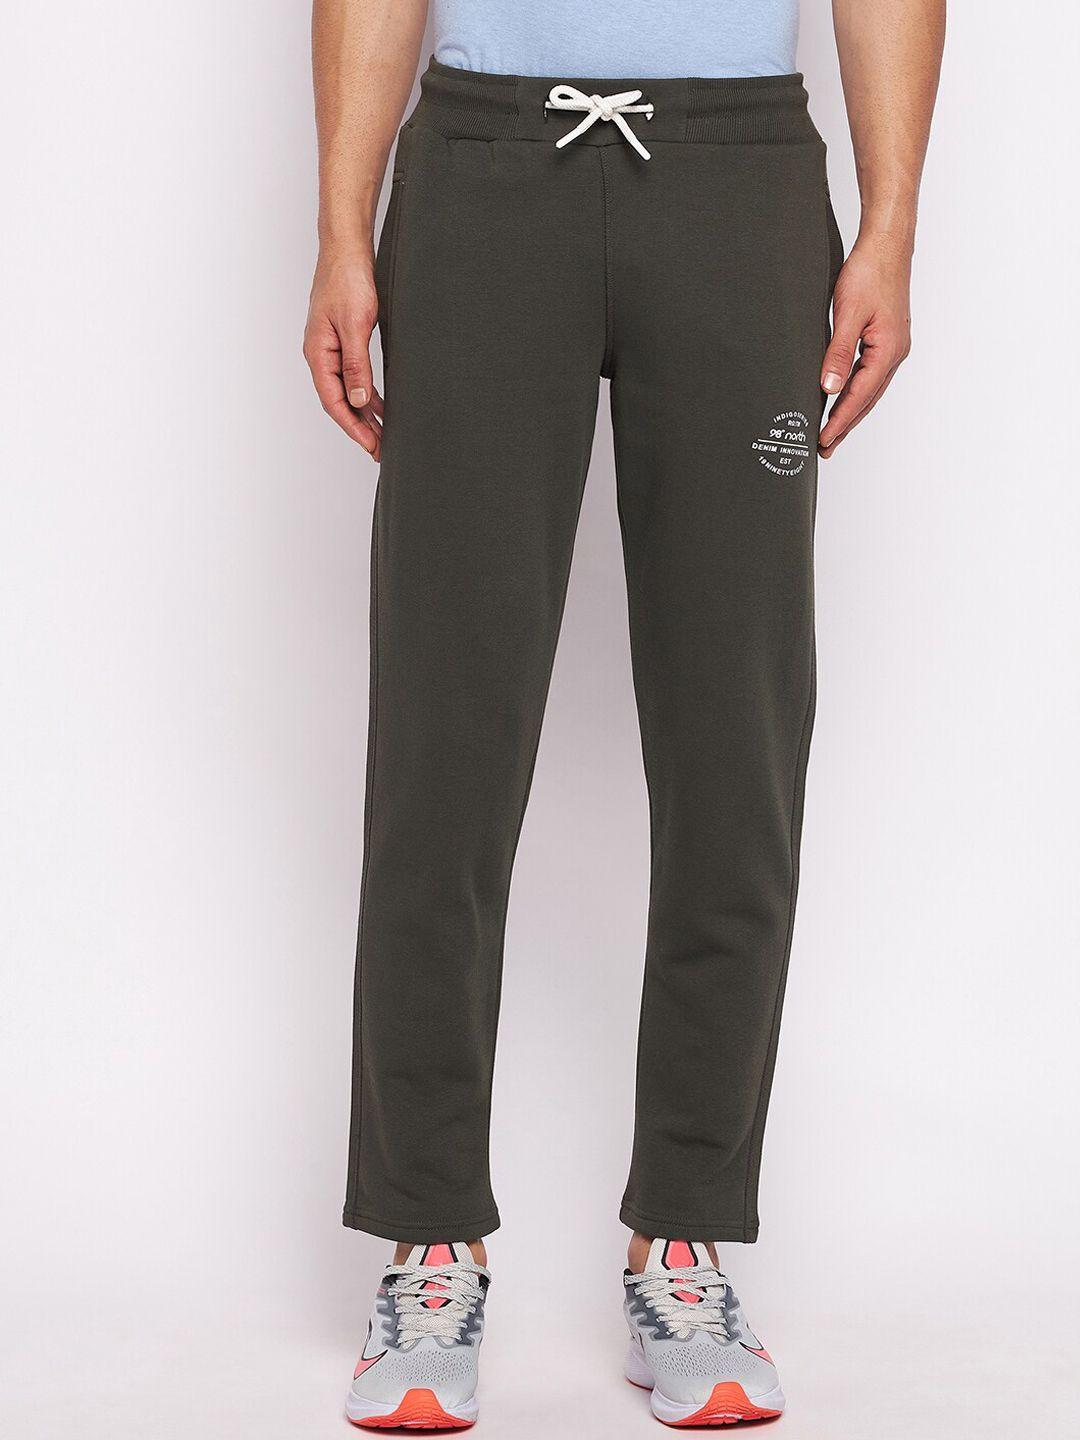 98 degree north men olive solid cotton track pant